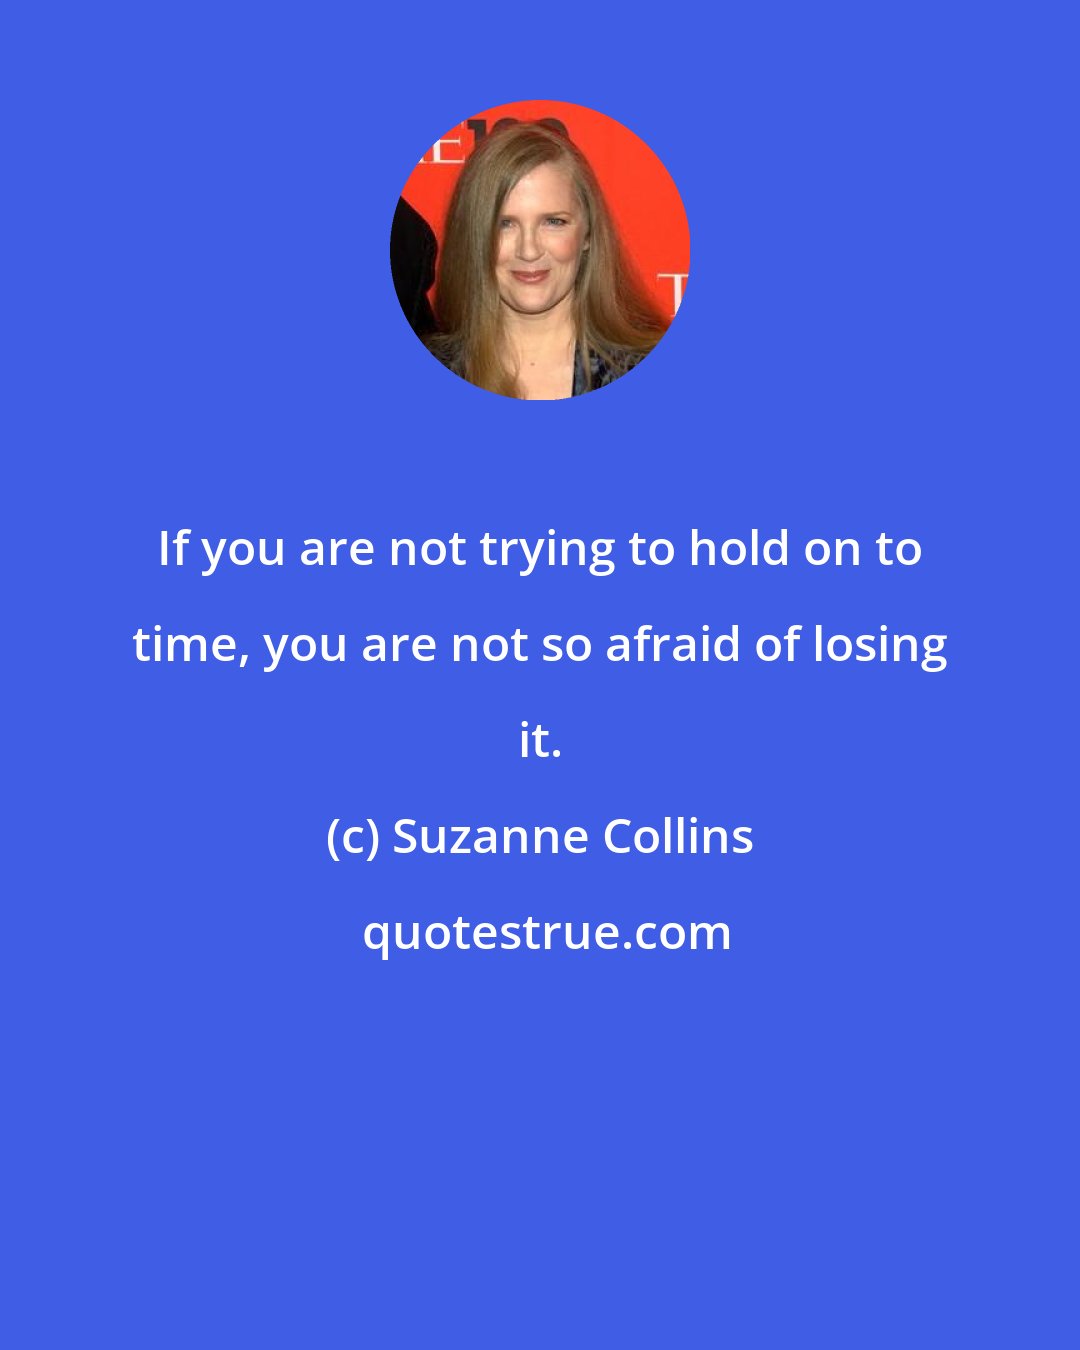 Suzanne Collins: If you are not trying to hold on to time, you are not so afraid of losing it.